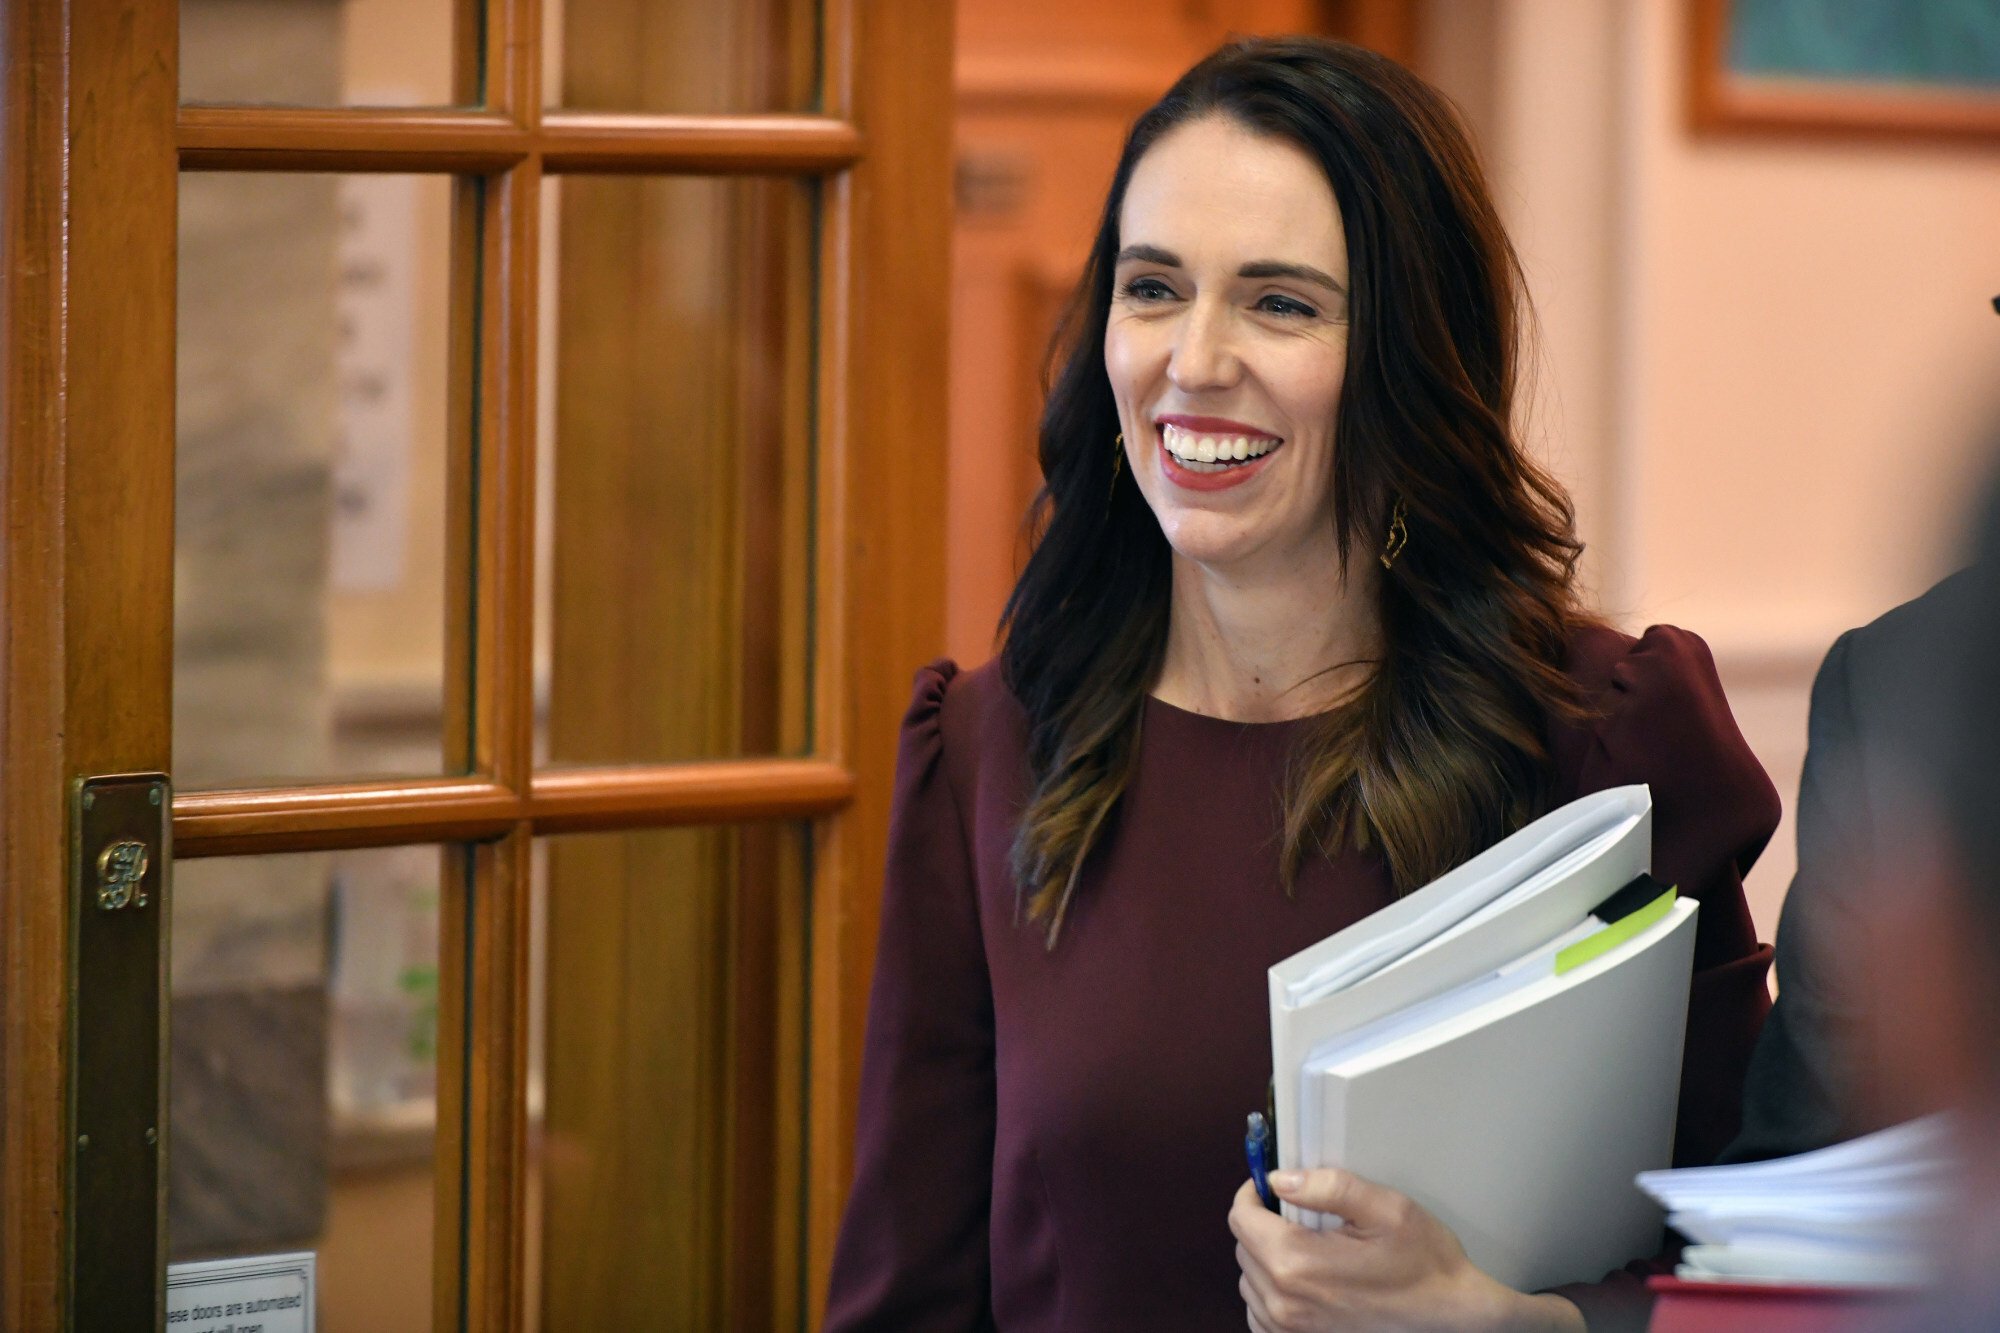 Jacinda Ardern has projected a thoughtful image during her time in office, even reducing her own salary in solidarity with other New Zealanders during the pandemic. Photo: Bloomberg